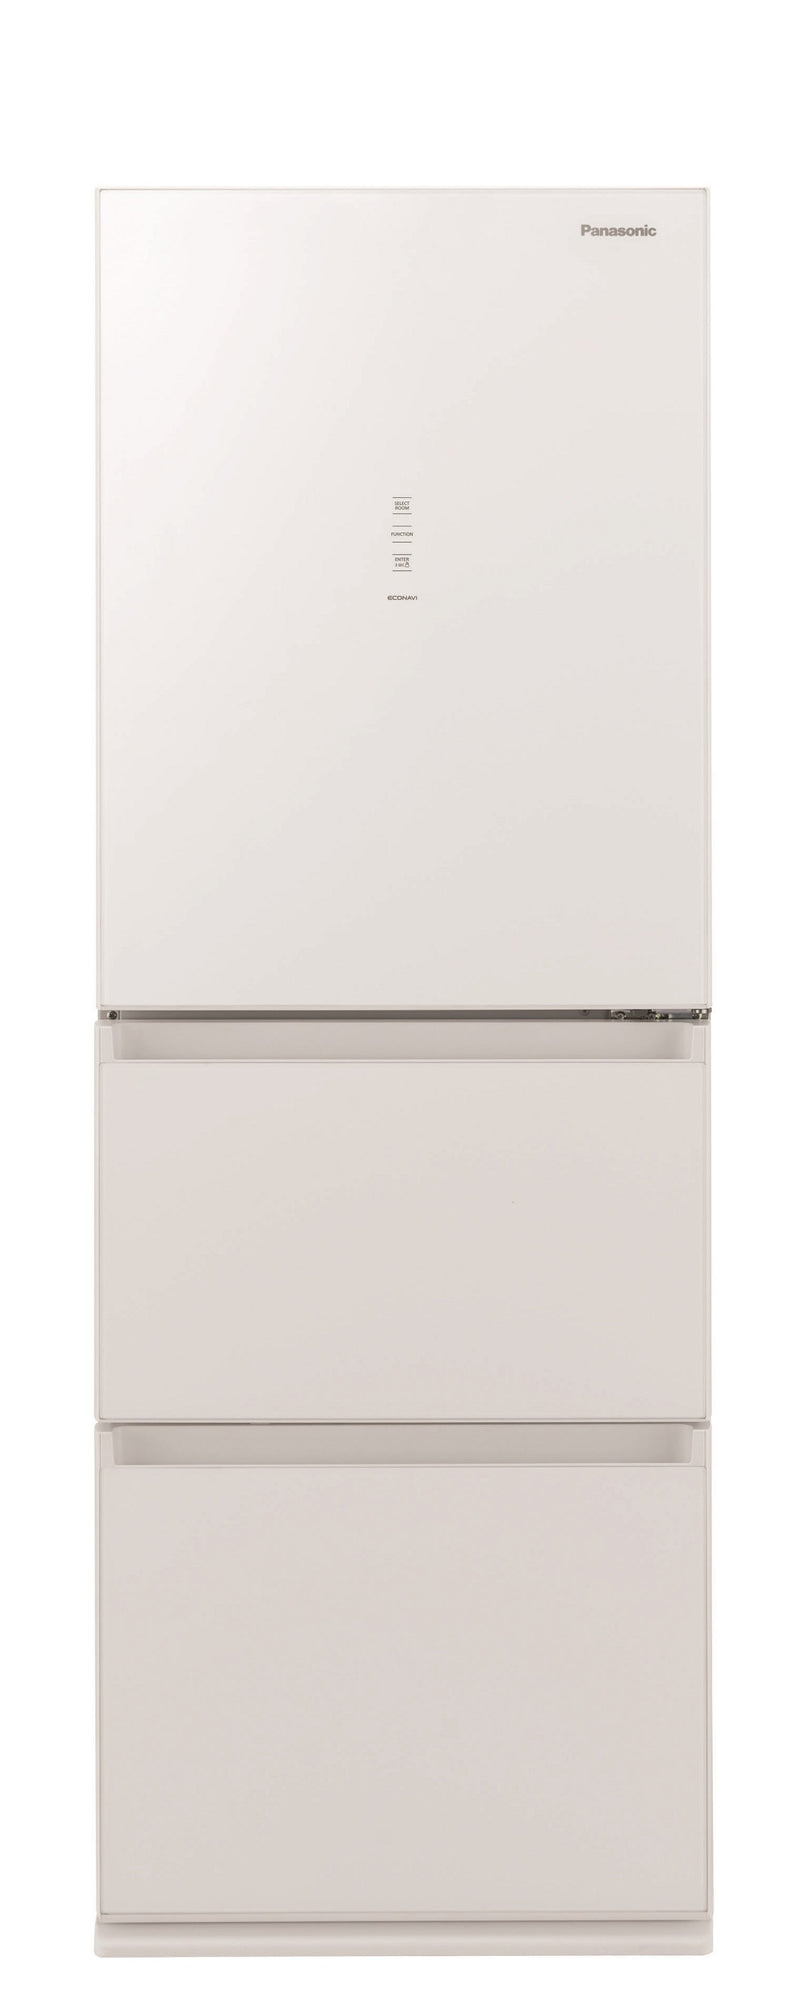 PANASONIC NR-C340GH 273L ECONAVI 3-door Refrigerator (includes unpacking and moving appliance service)